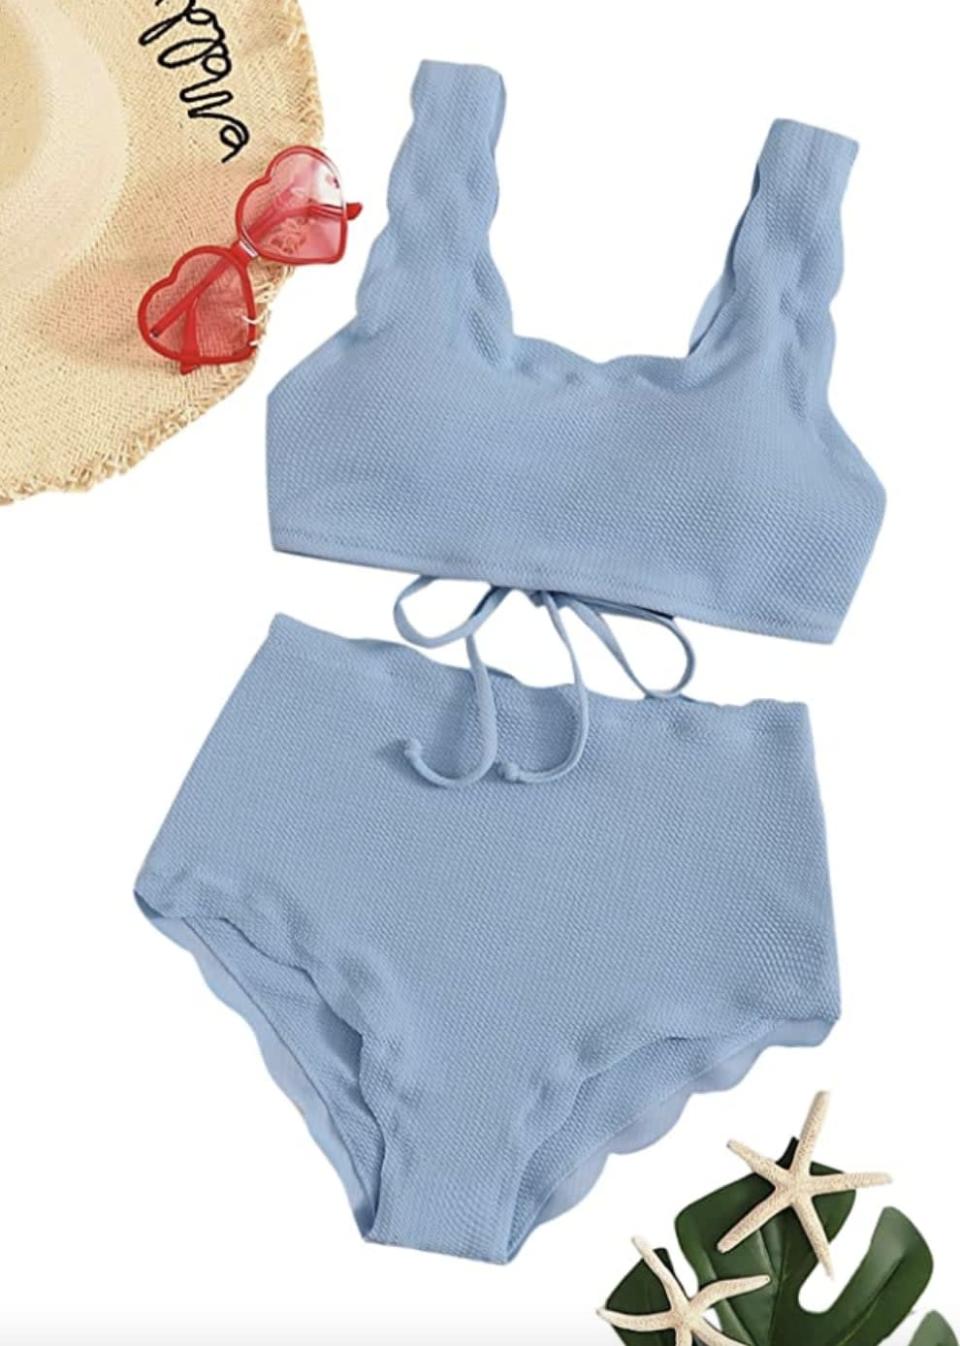 <p>This <span>SweatyRocks High-Waist Scalloped Bikini</span> ($16-$30) has a charming silhouette and playful color palette you'll be sure to love. It comes in lots of colors, both vibrant and neutrals. Plus, it has a more full coverage bottom that's great for beach days.</p>